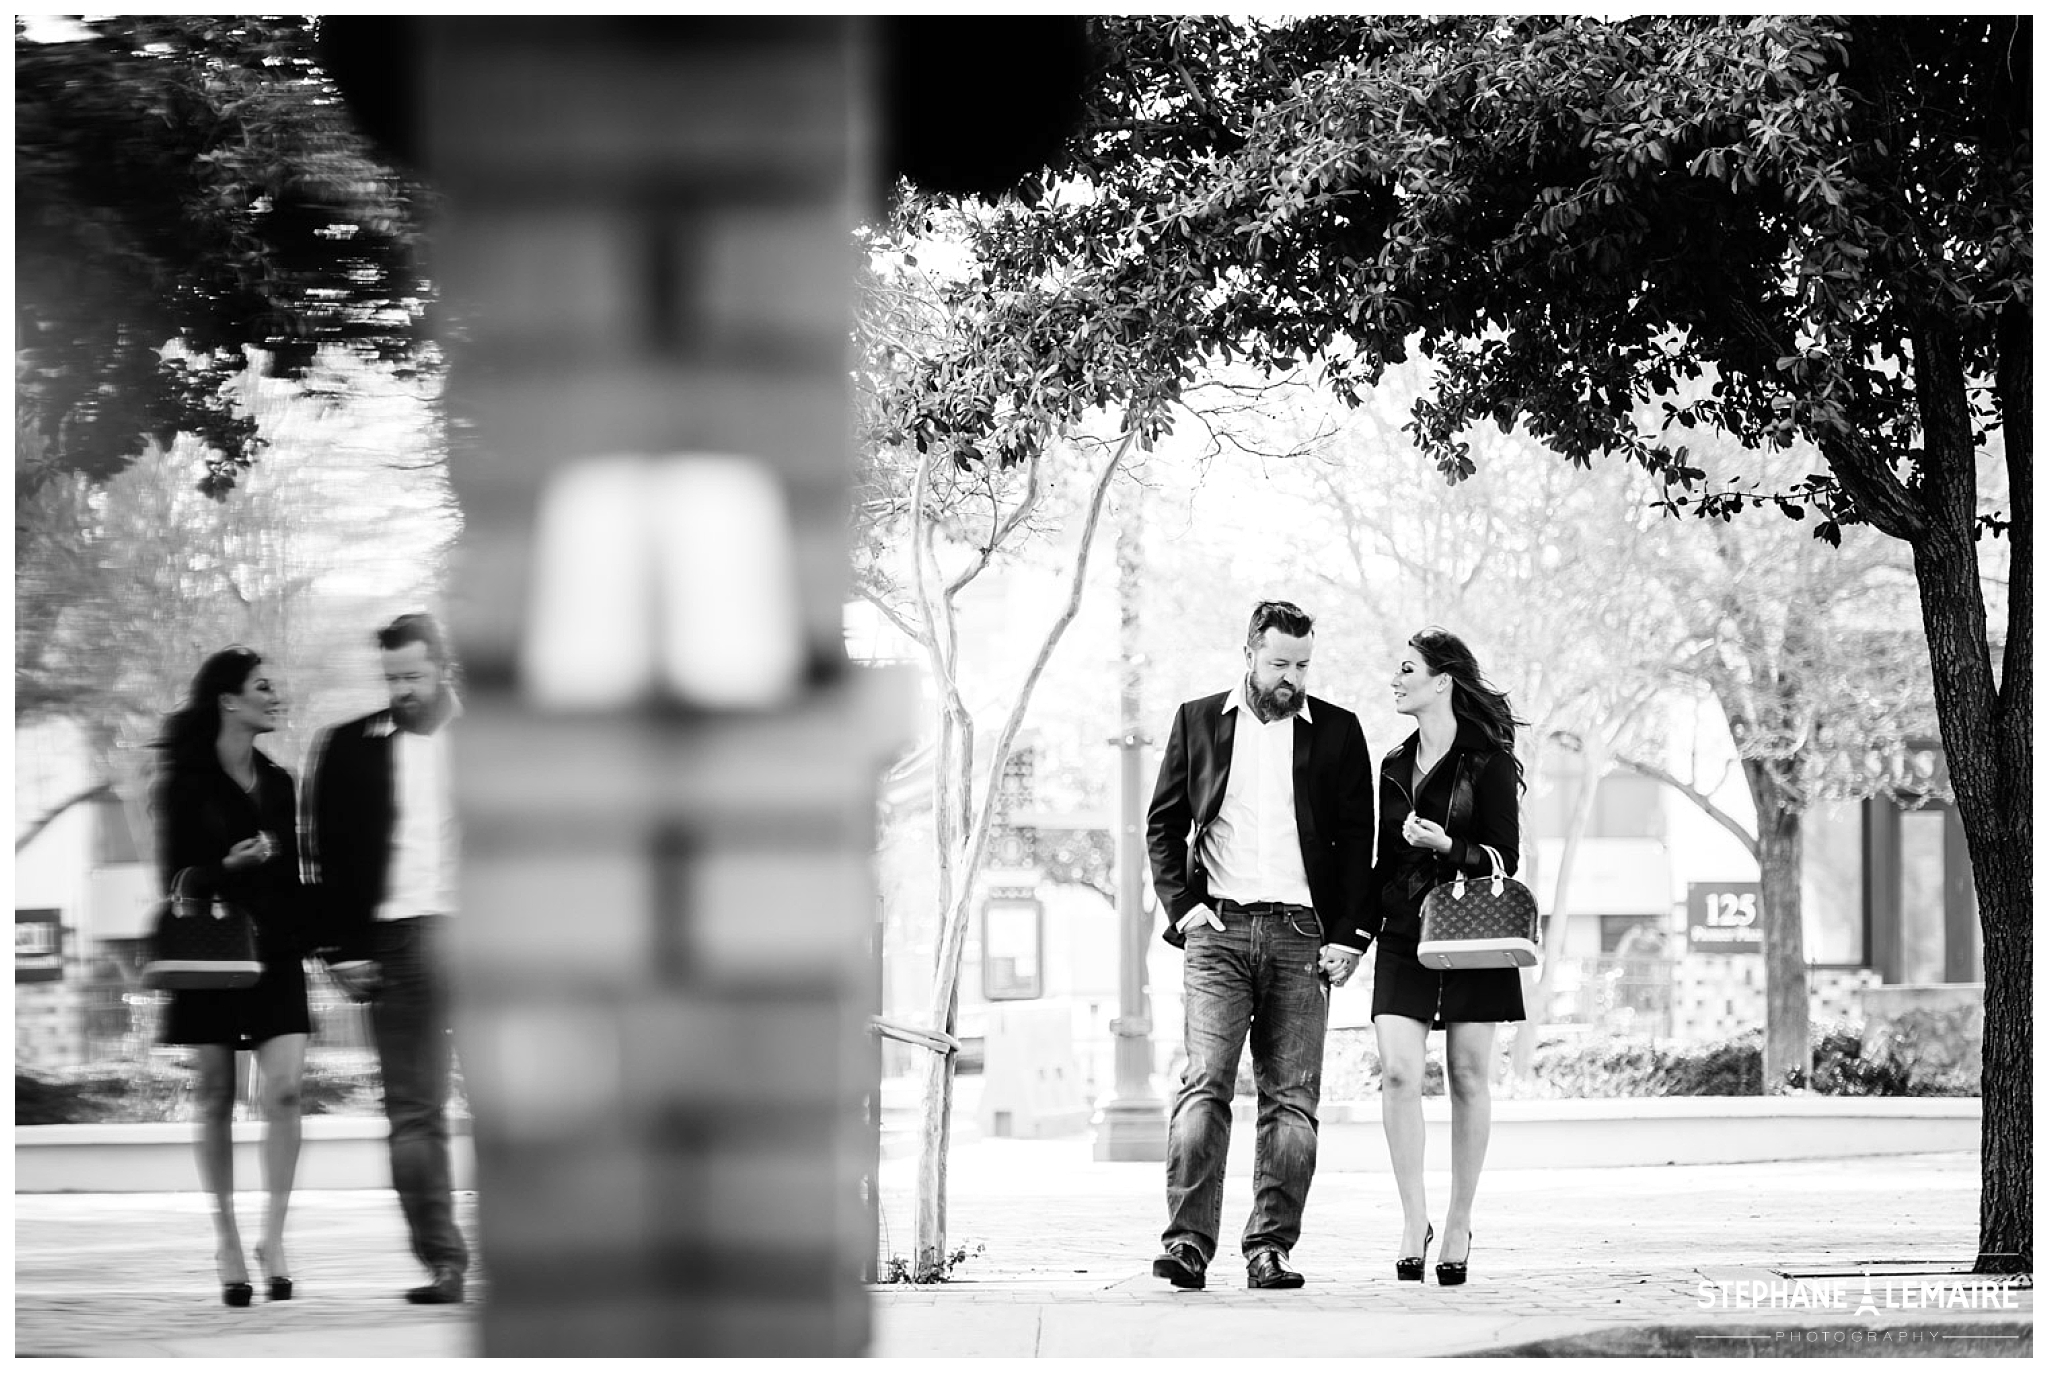 Black and White photo of a couple walking in the street